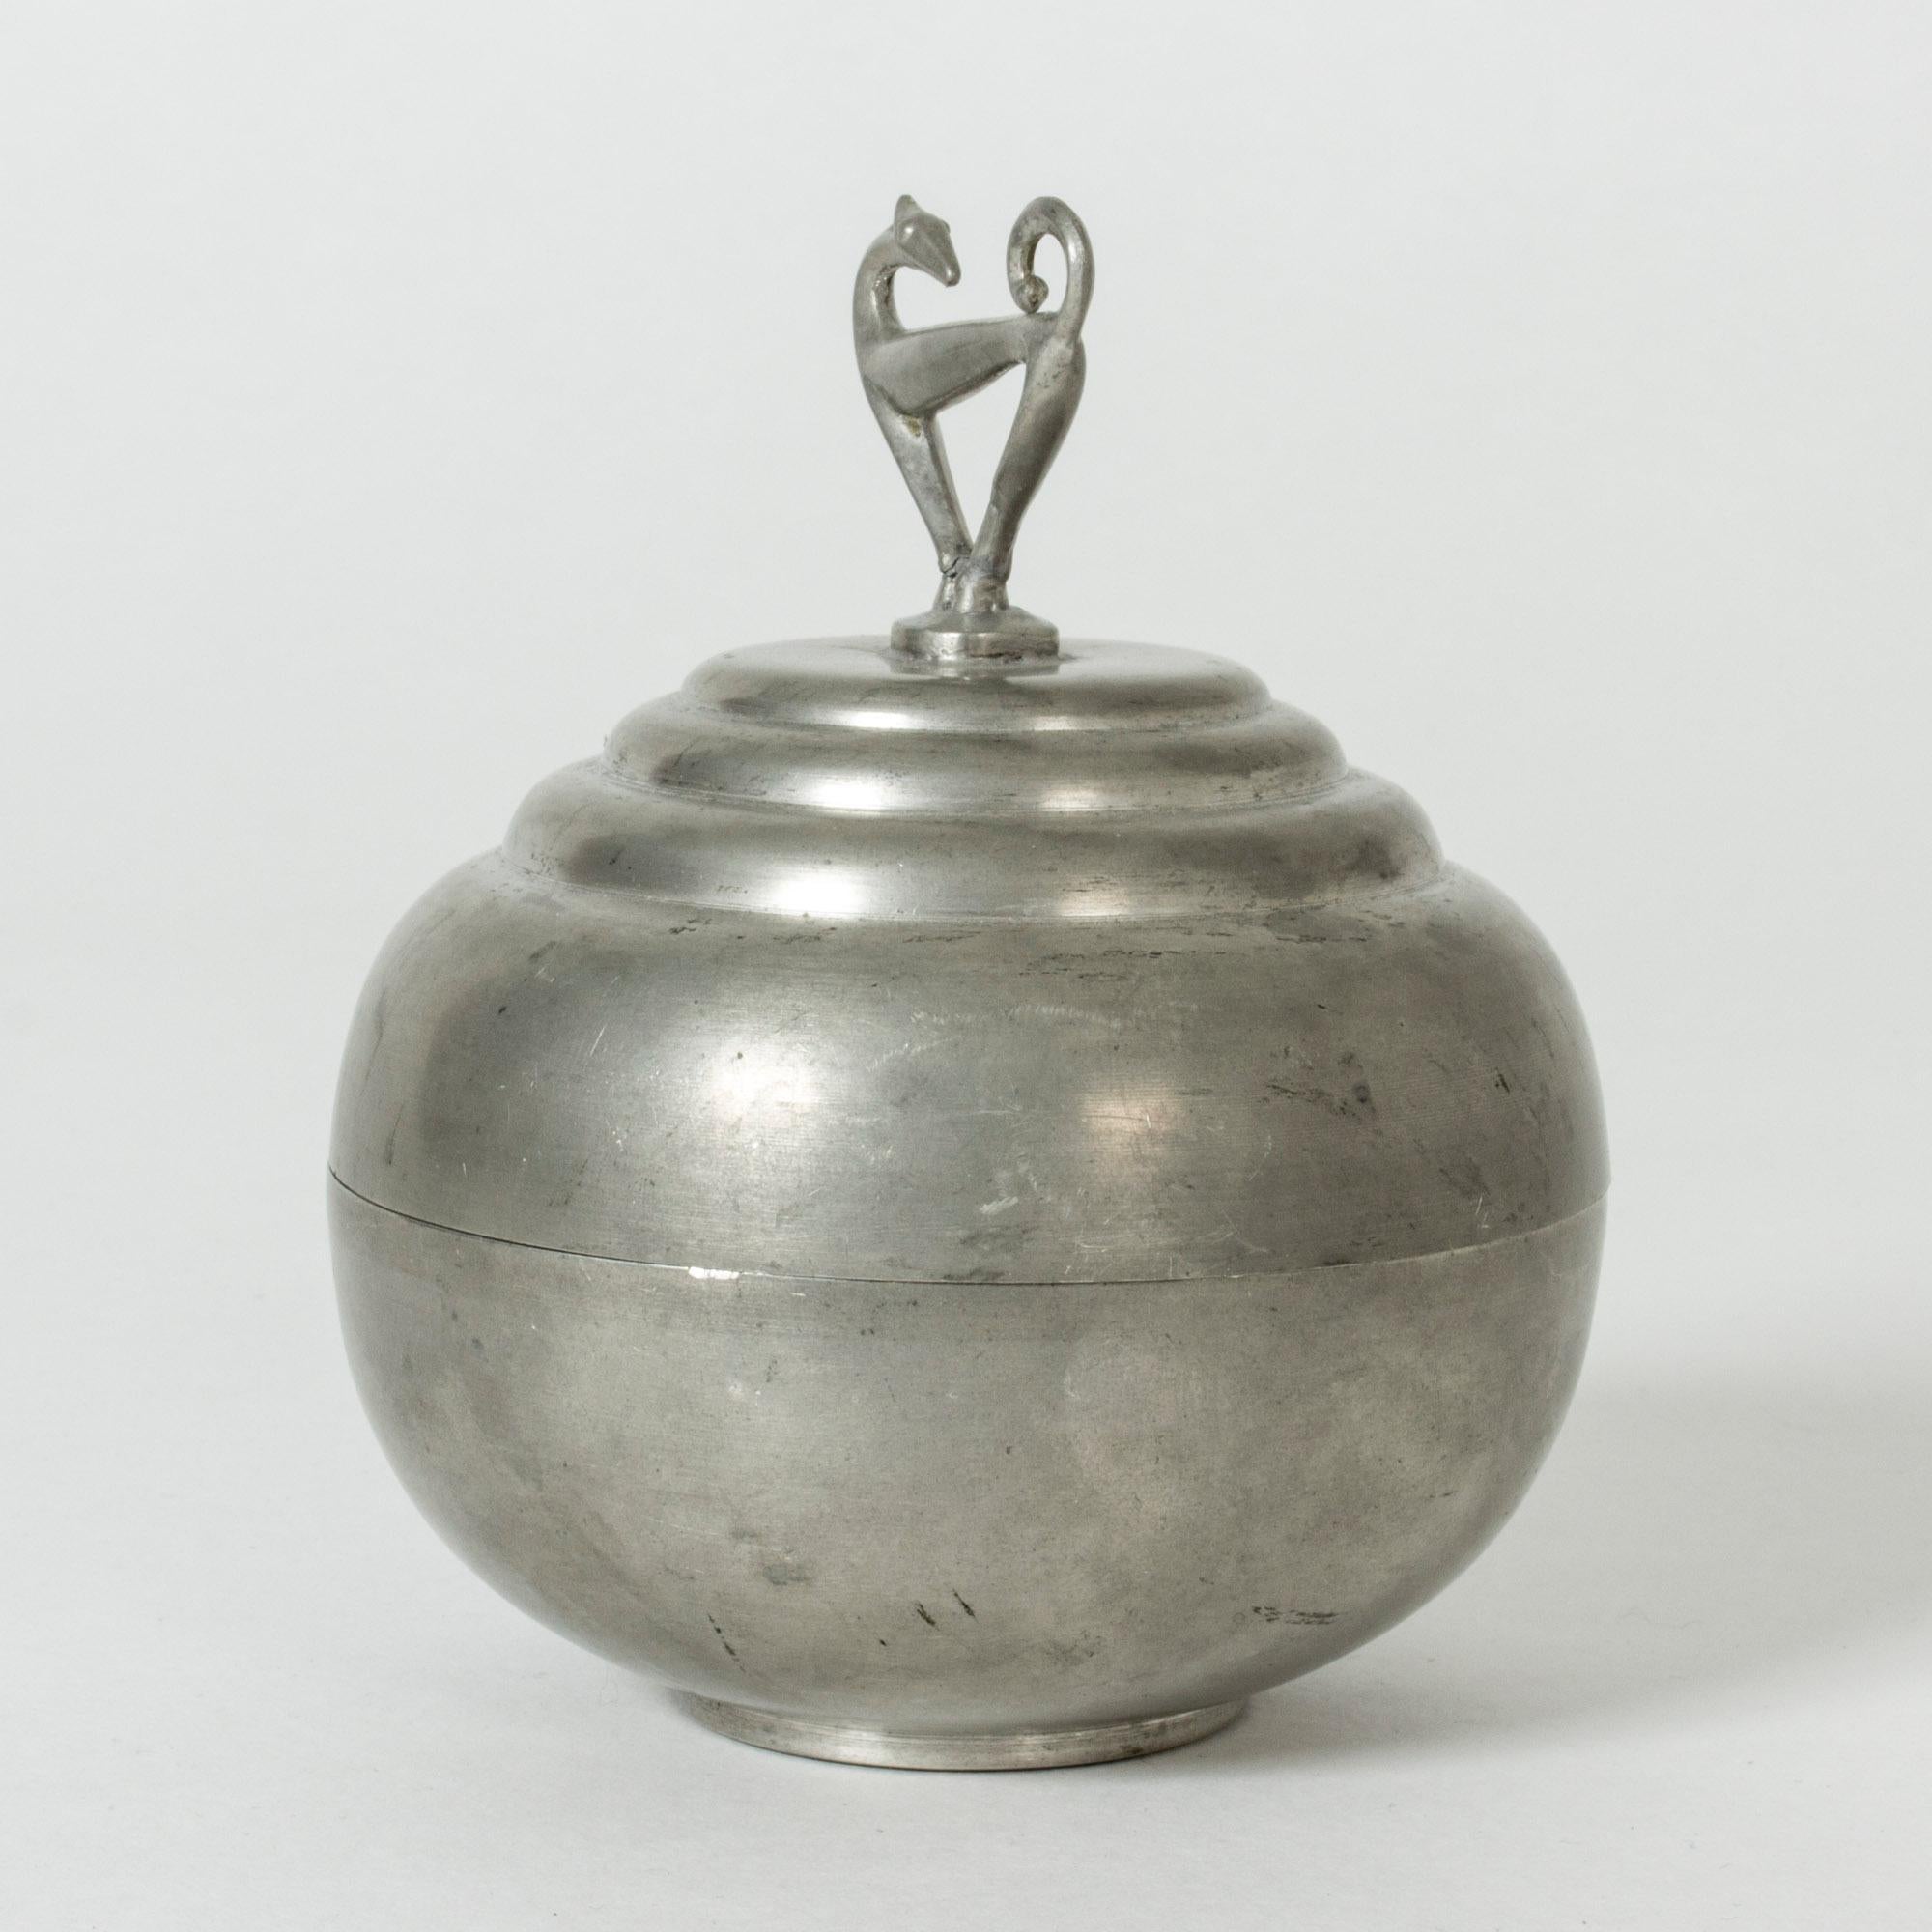 Cool pewter jar by Sylvia Stave, in a smooth, plump shape. A beautifully sculpted, graphic greyhound serves as decoration and knob.